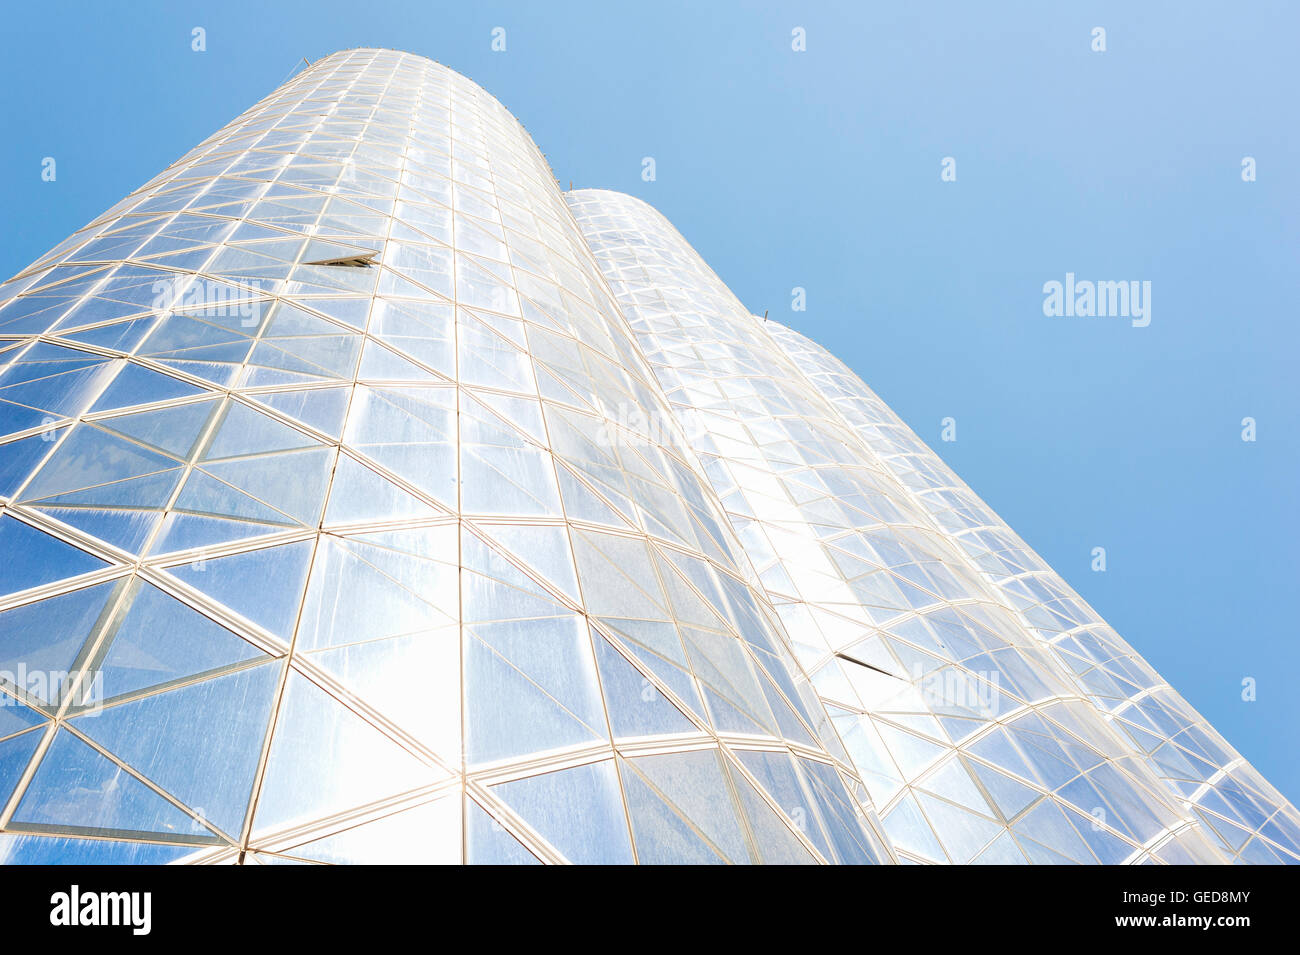 Facades of skyscrapers in Dubai with the blue glass exterior in bright sunlight. Stock Photo